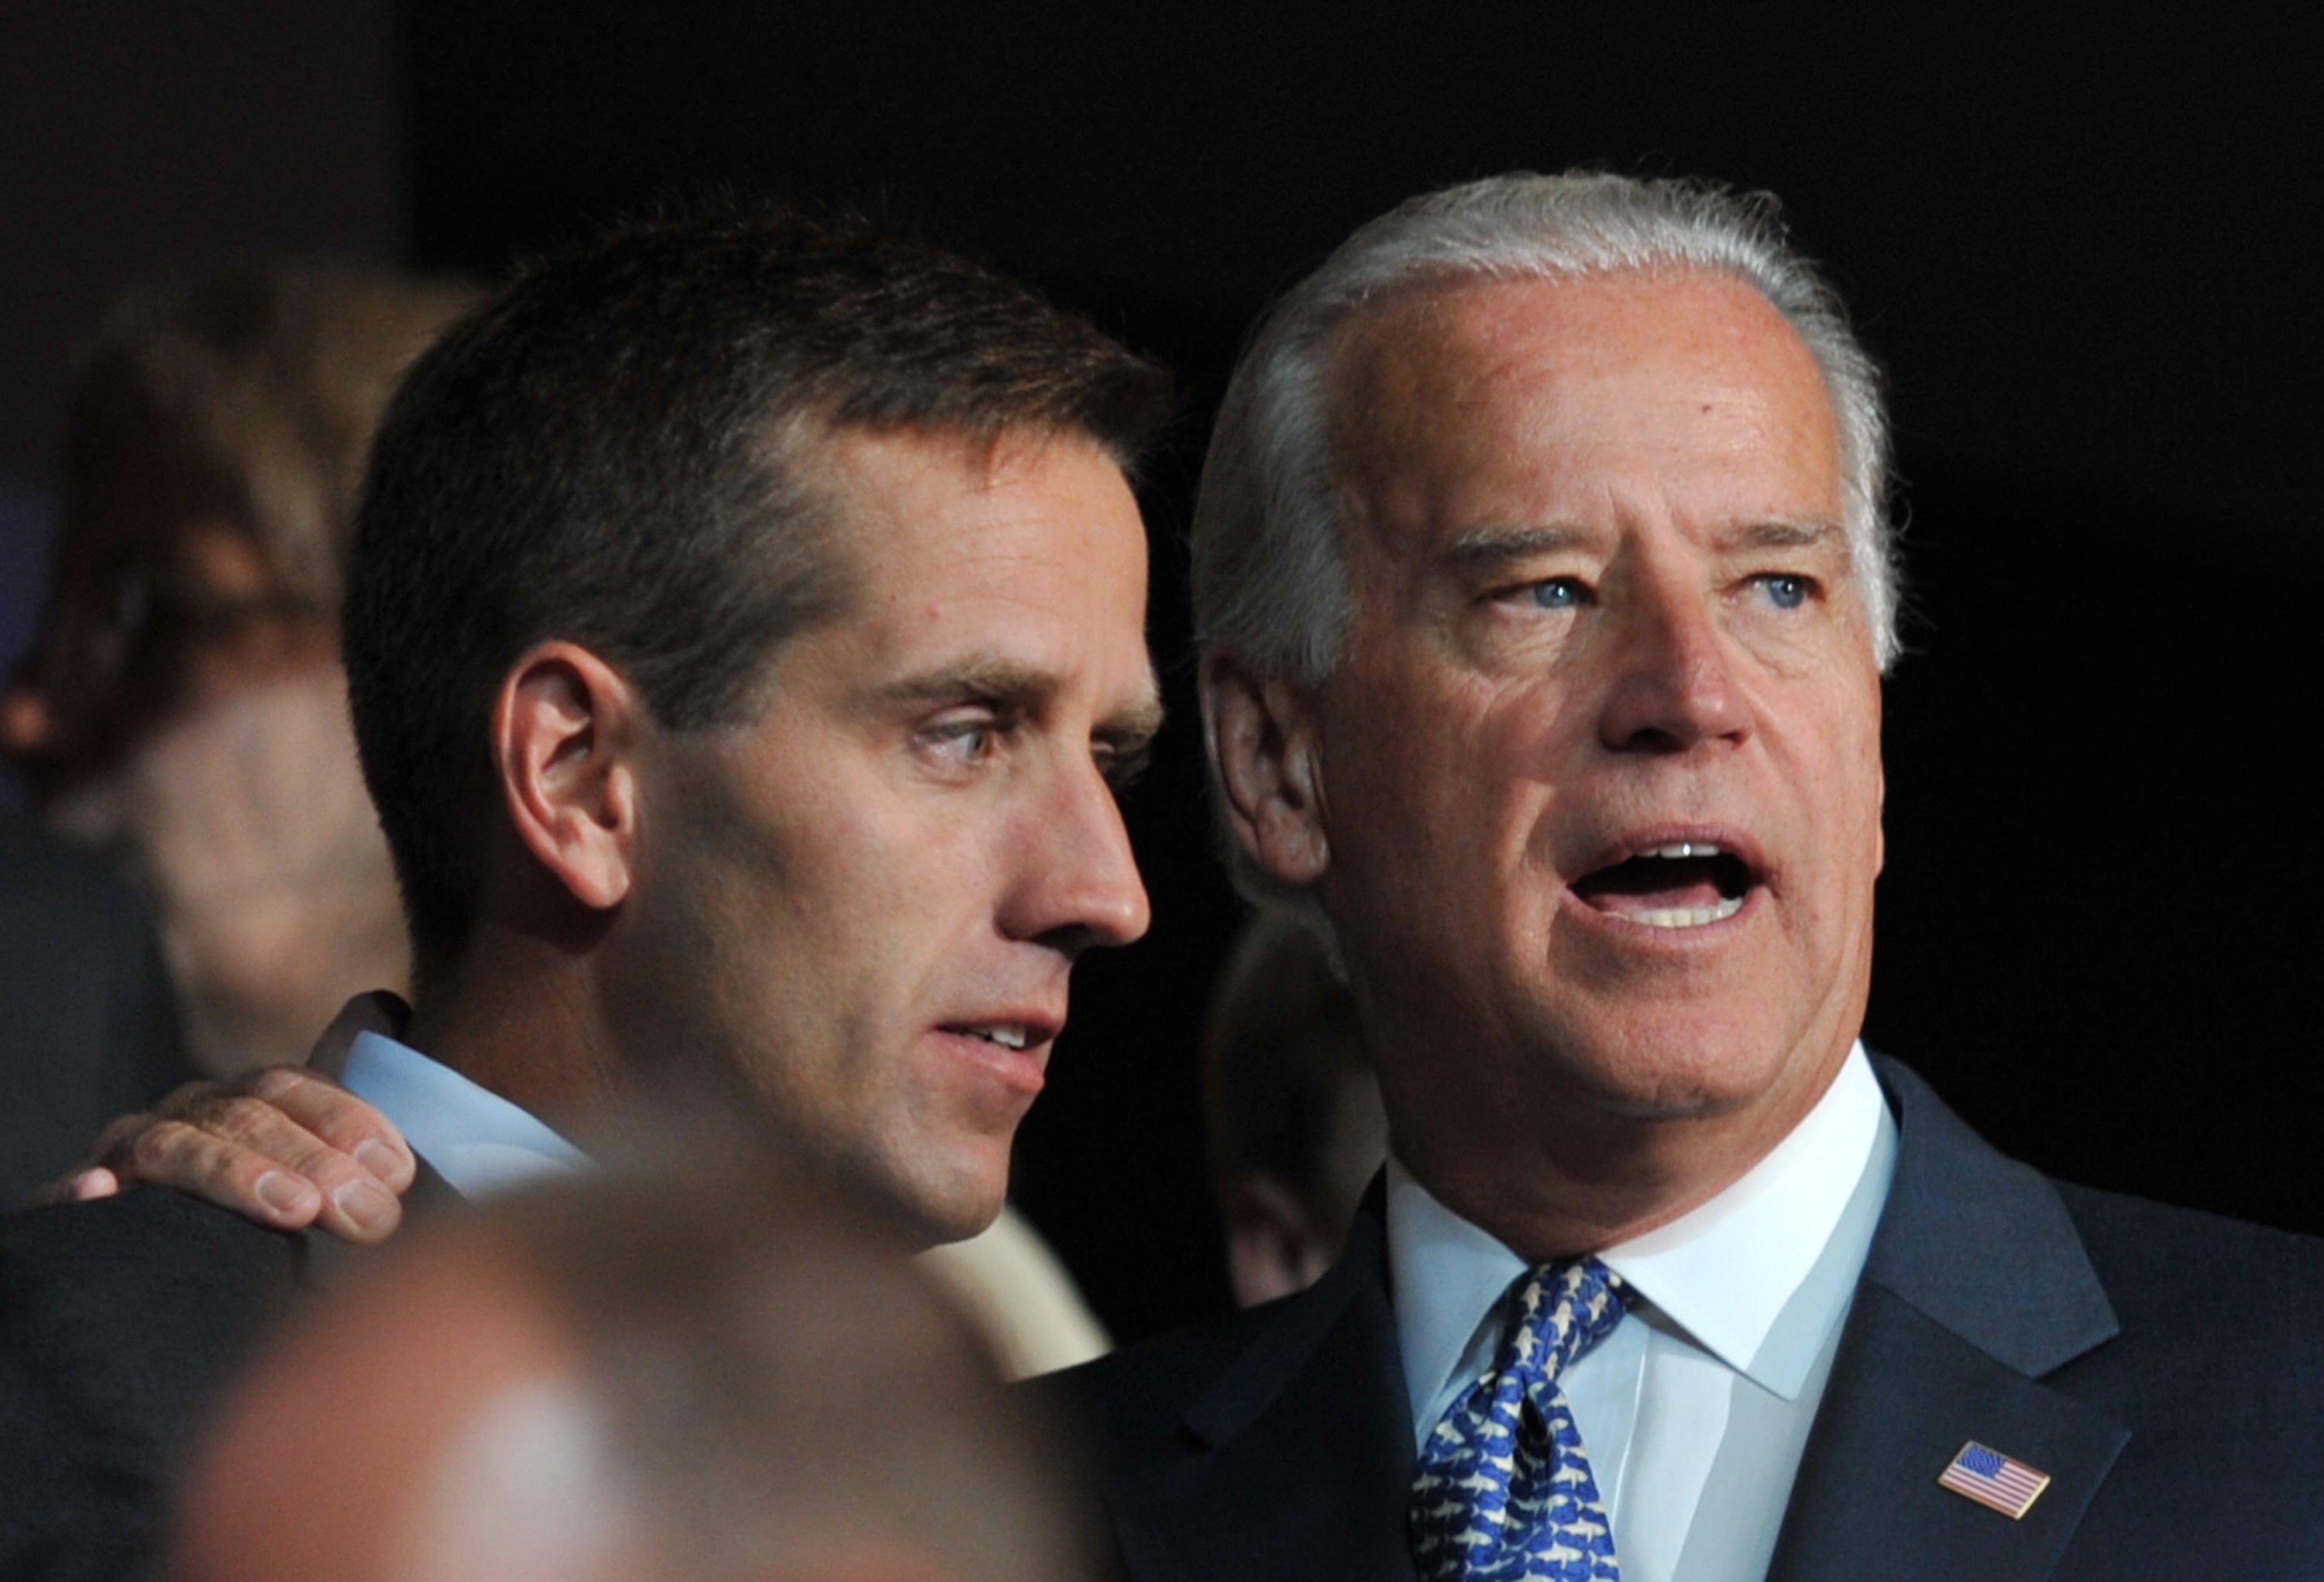 Beau Biden and Joe Biden are pictured together at the 2008 Democratic National Convention